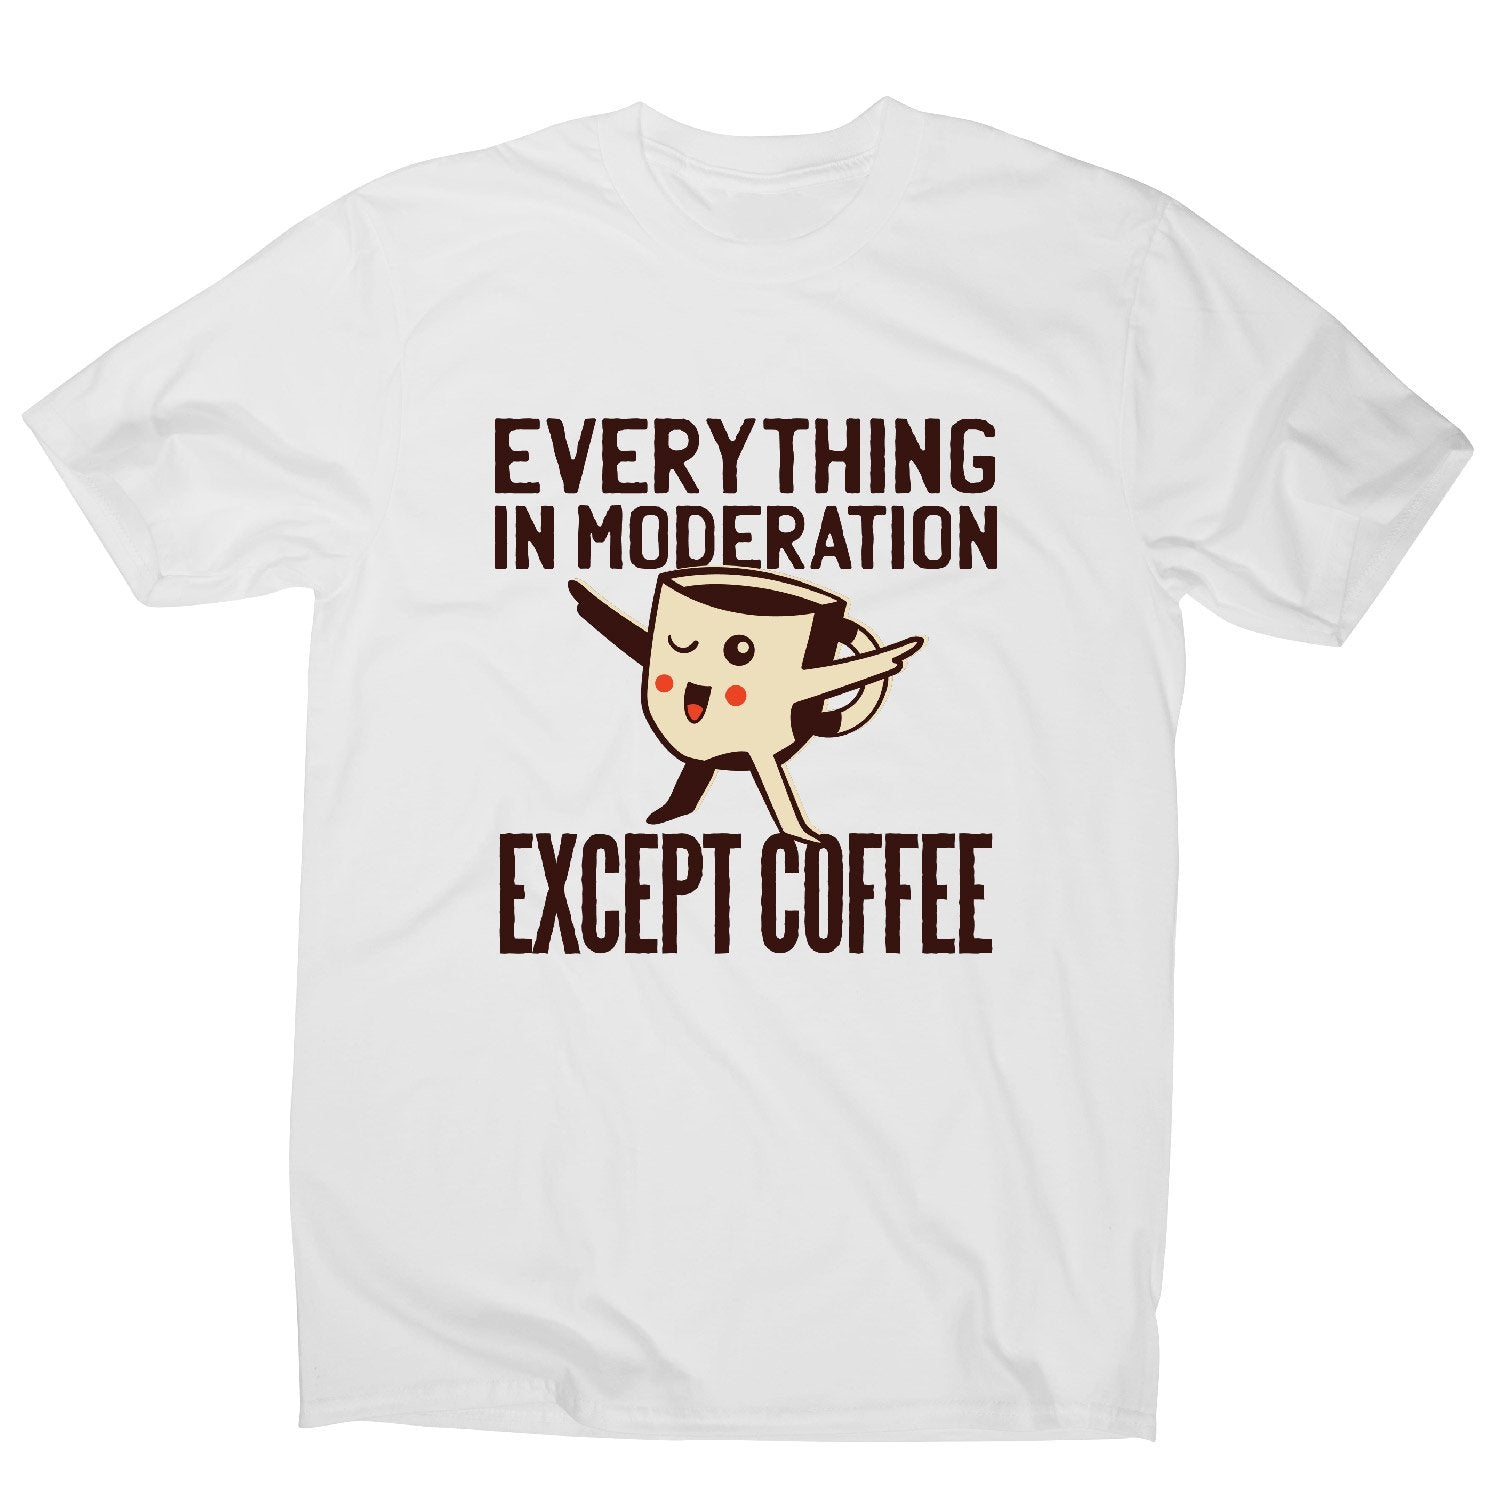 Funny slogan T shirts | Funny T shirts for men | Coffee quote kawaii ...